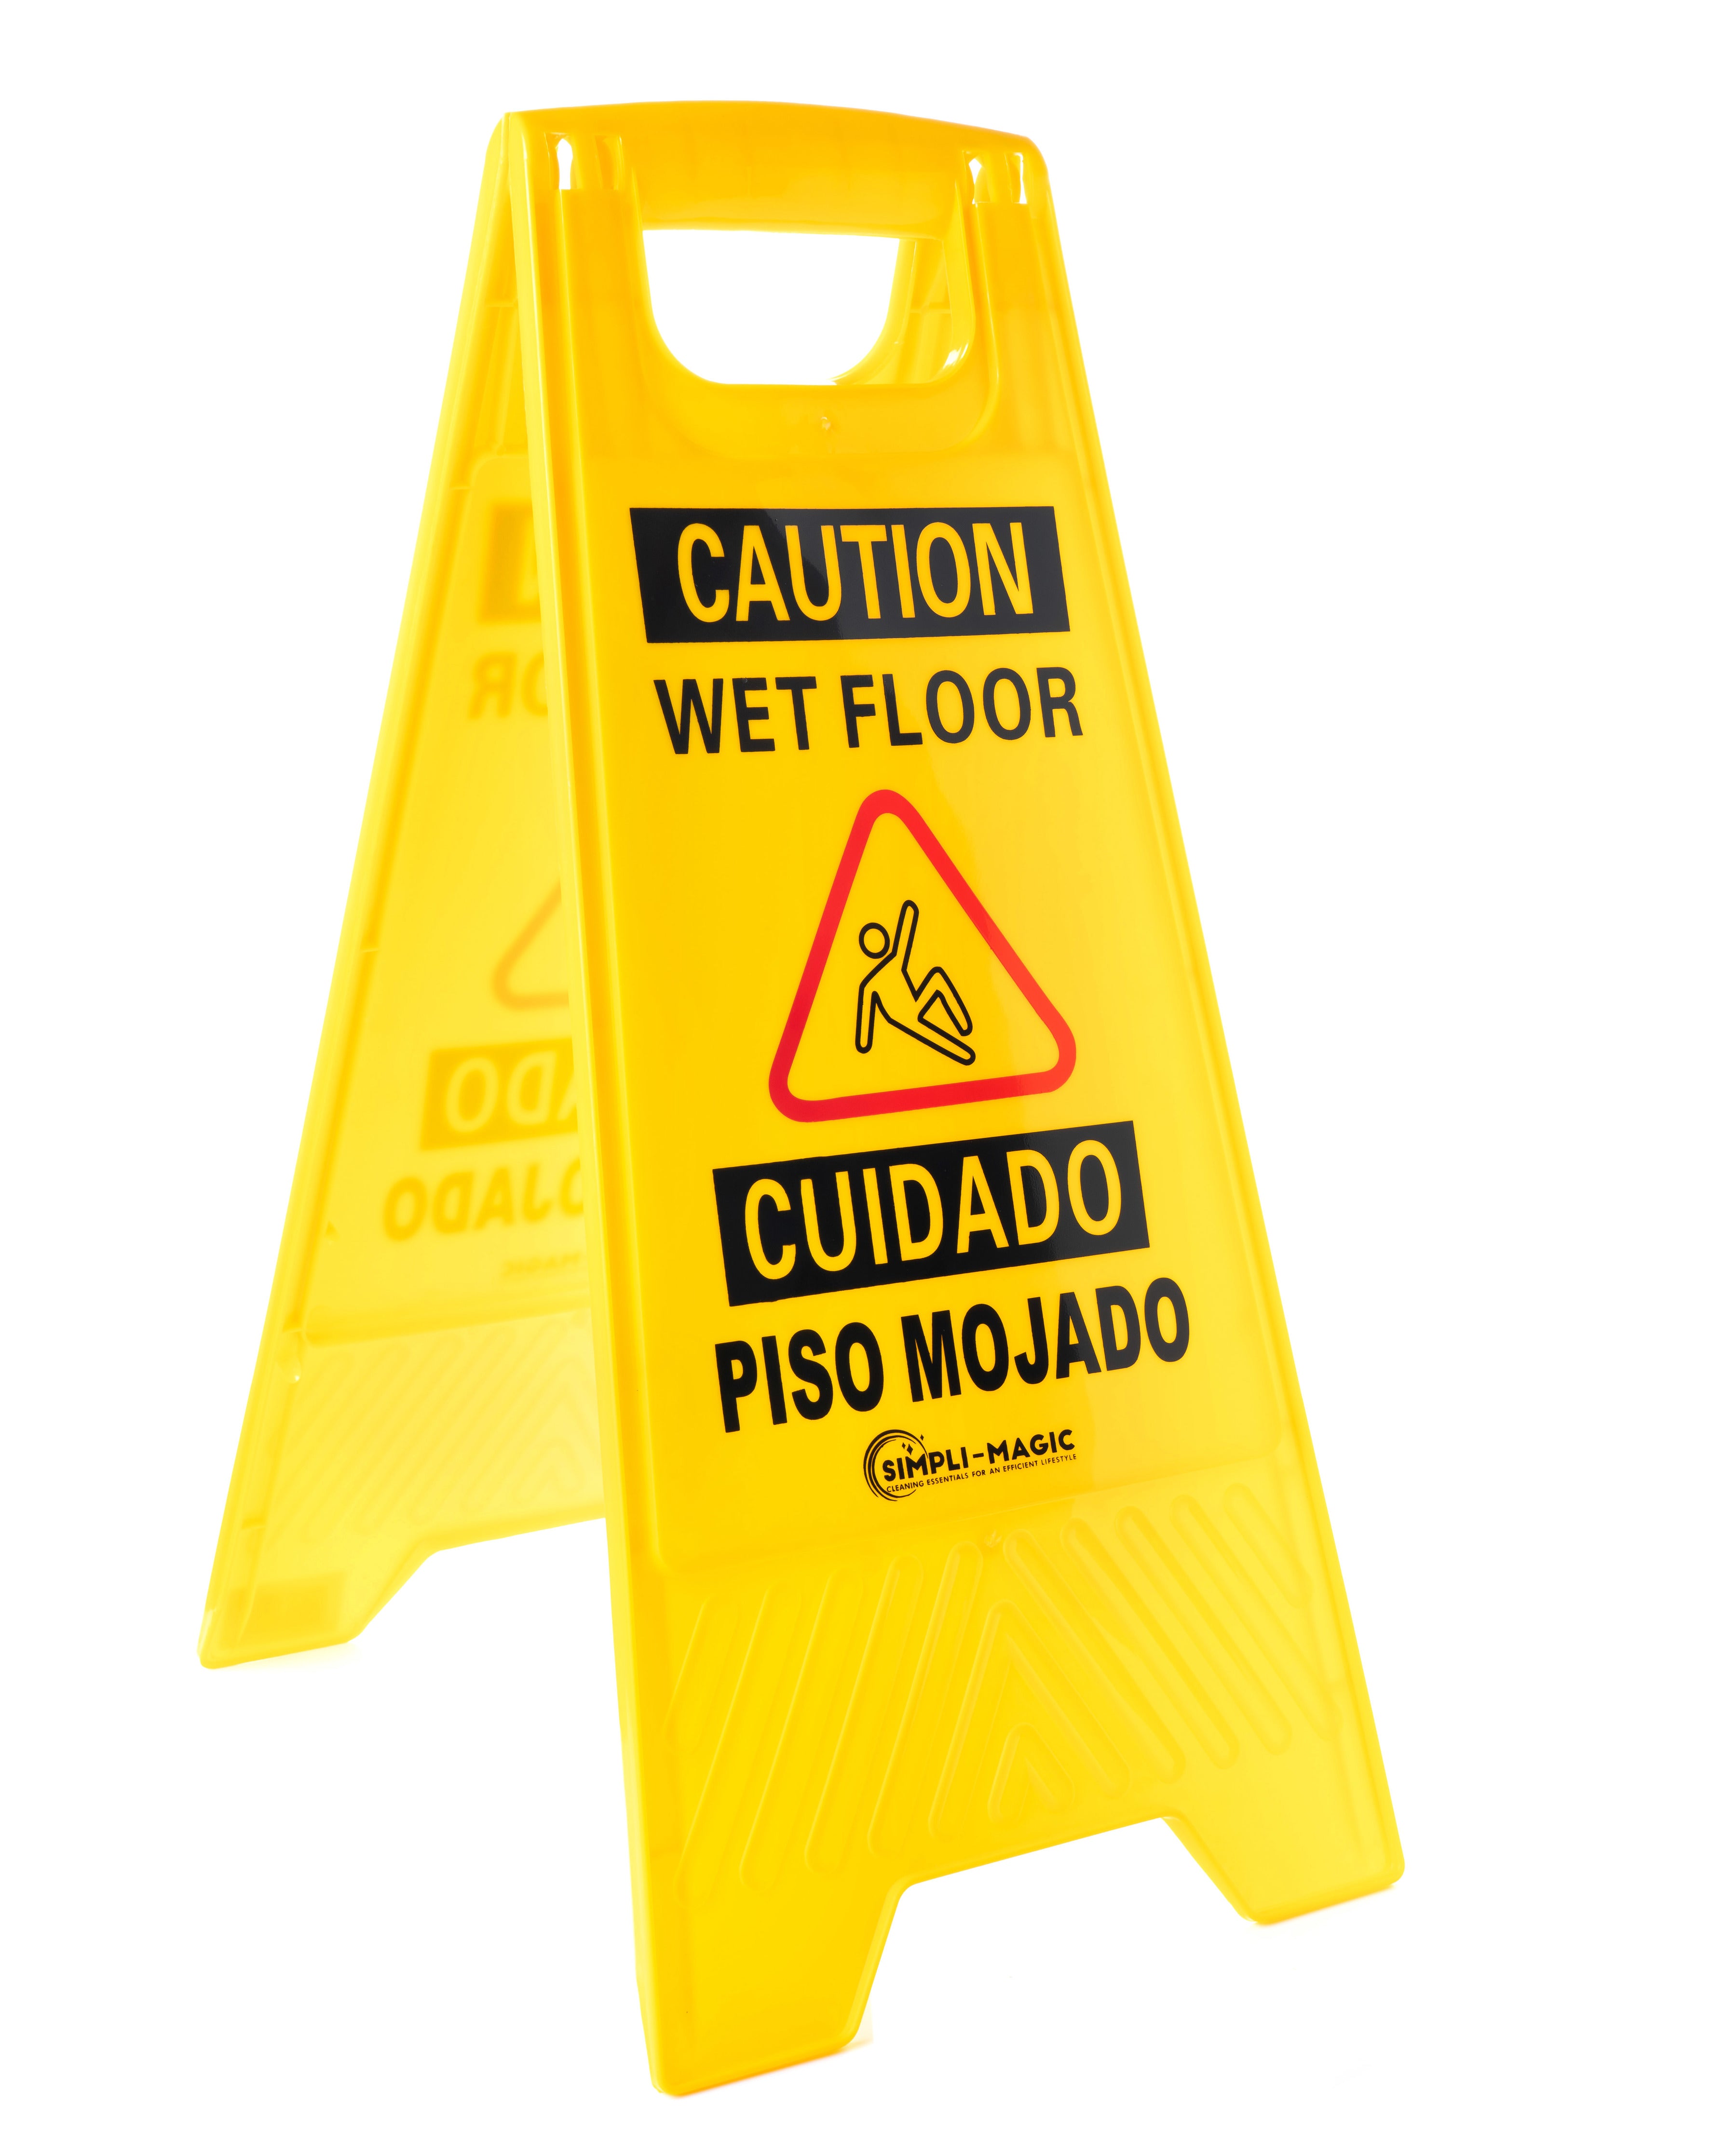 Wet Floor Signs (3 Pack) - The Clean Store